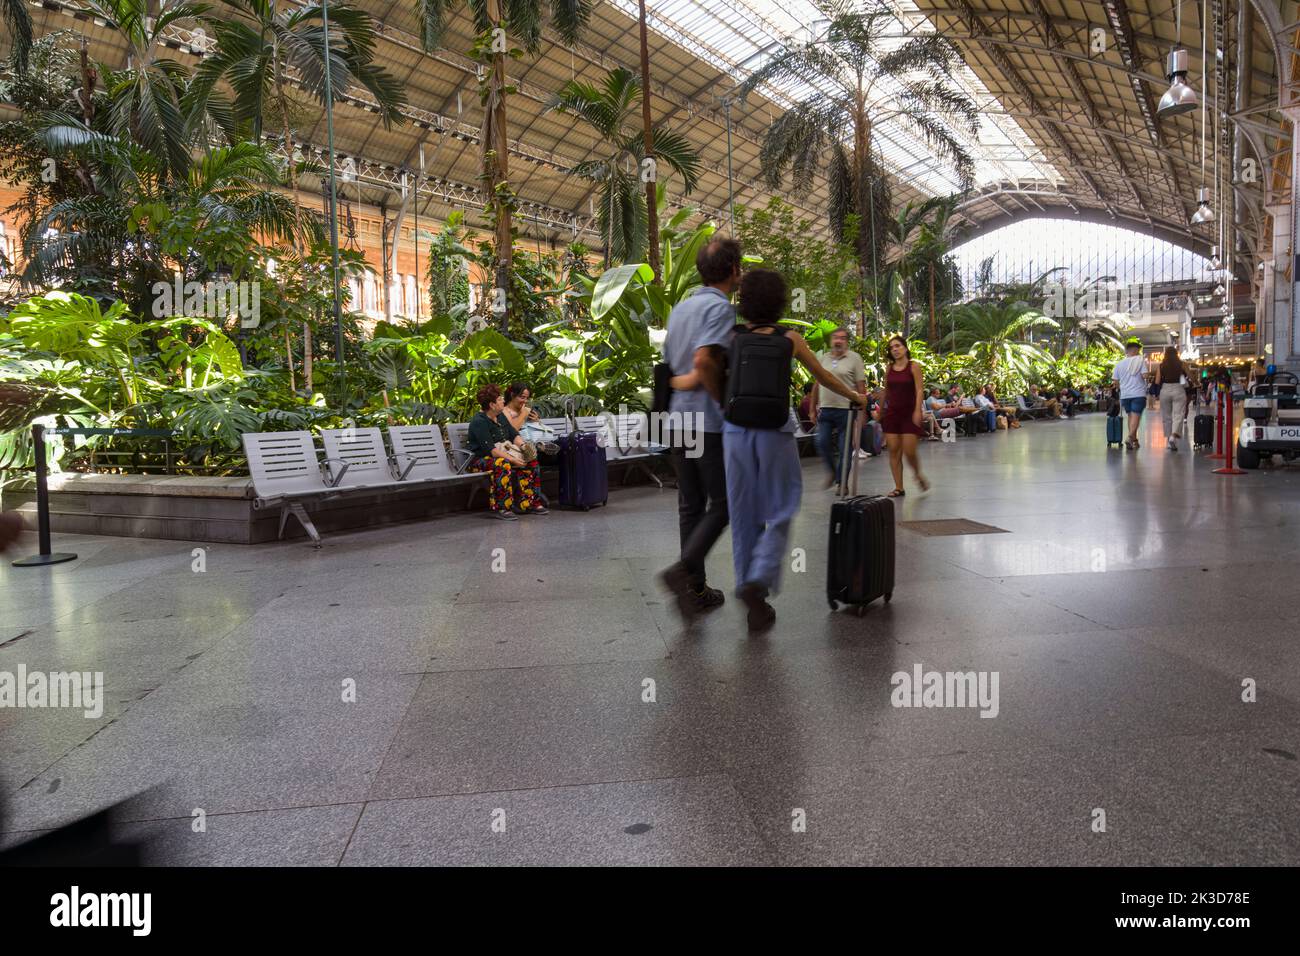 Madrid, Spain, September 2022. The indoor tropical garden in the Atocha railway station in the city center Stock Photo